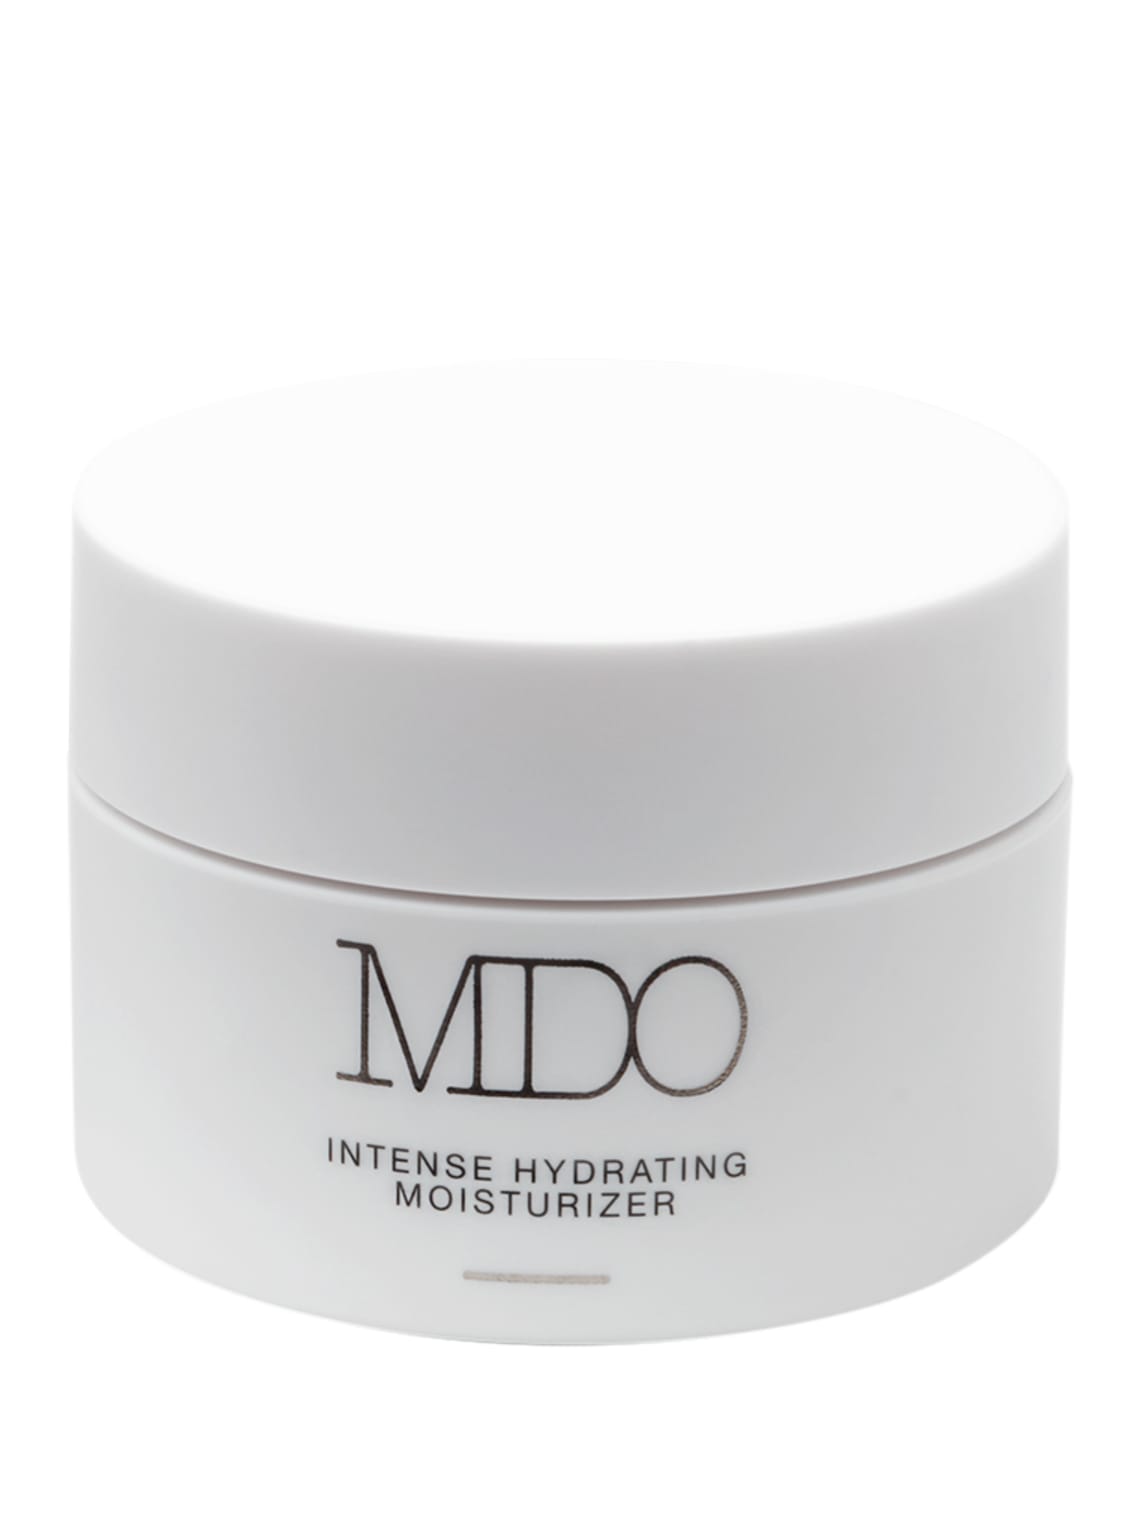 Image of Mdo By Simon Ourian M.D. Intense Hydrating Moisturizer Gesichtscreme 50 ml